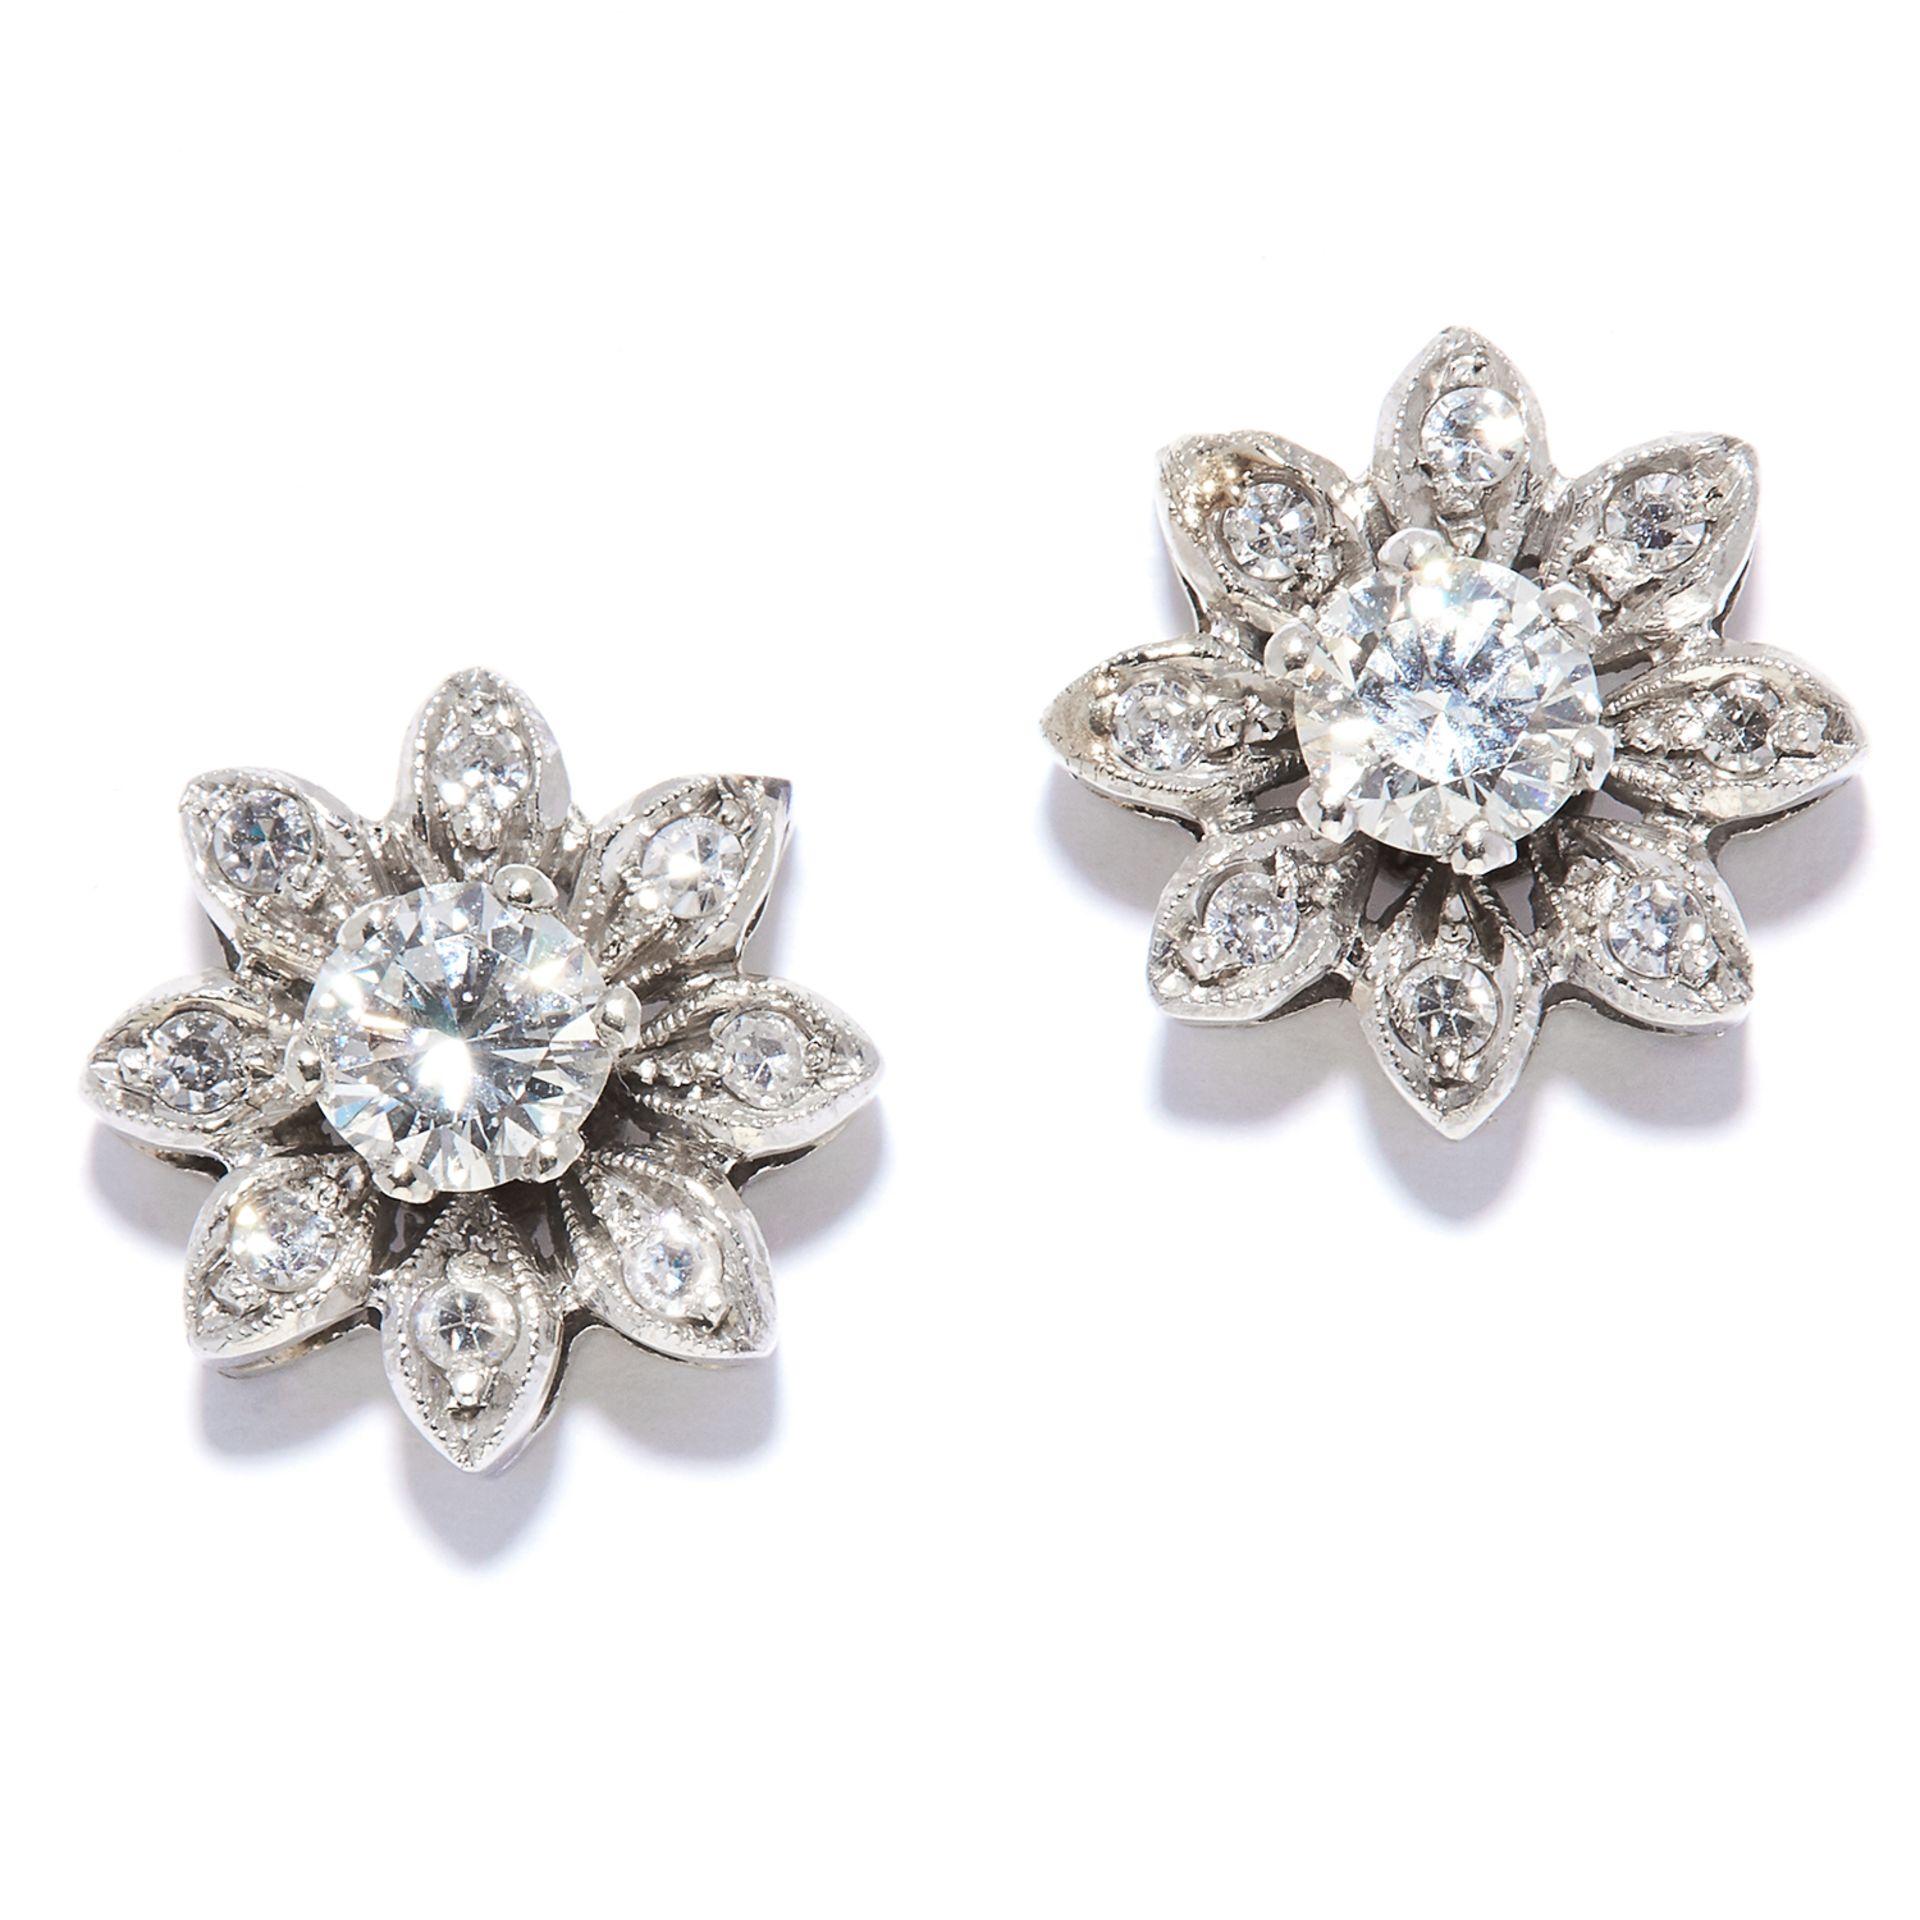 A PAIR OF DIAMOND CLUSTER STUD EARRINGS in 14ct white gold, each depicting a flower set with round